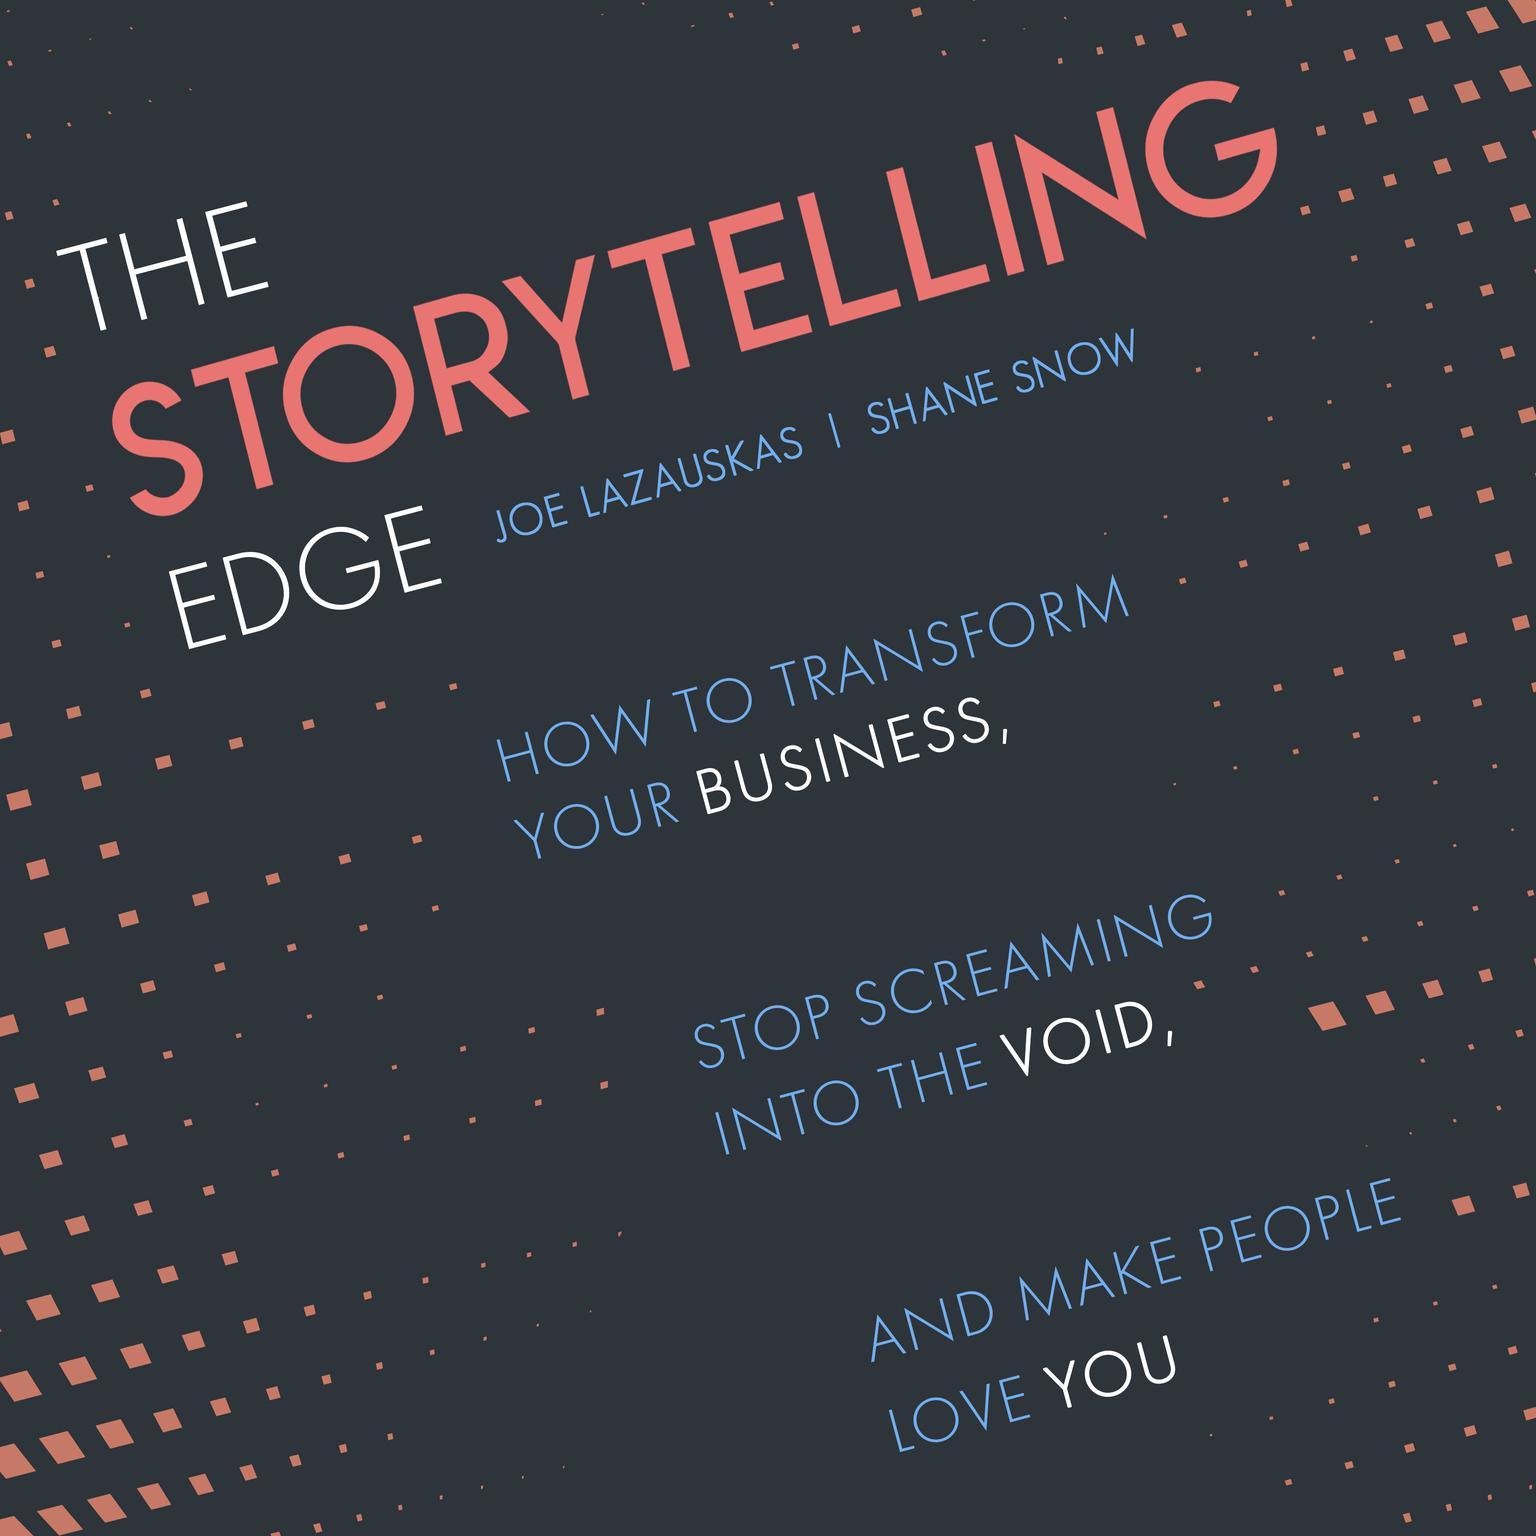 The Storytelling Edge: How to Transform Your Business, Stop Screaming into the Void, and Make People Love You Audiobook, by Shane Snow